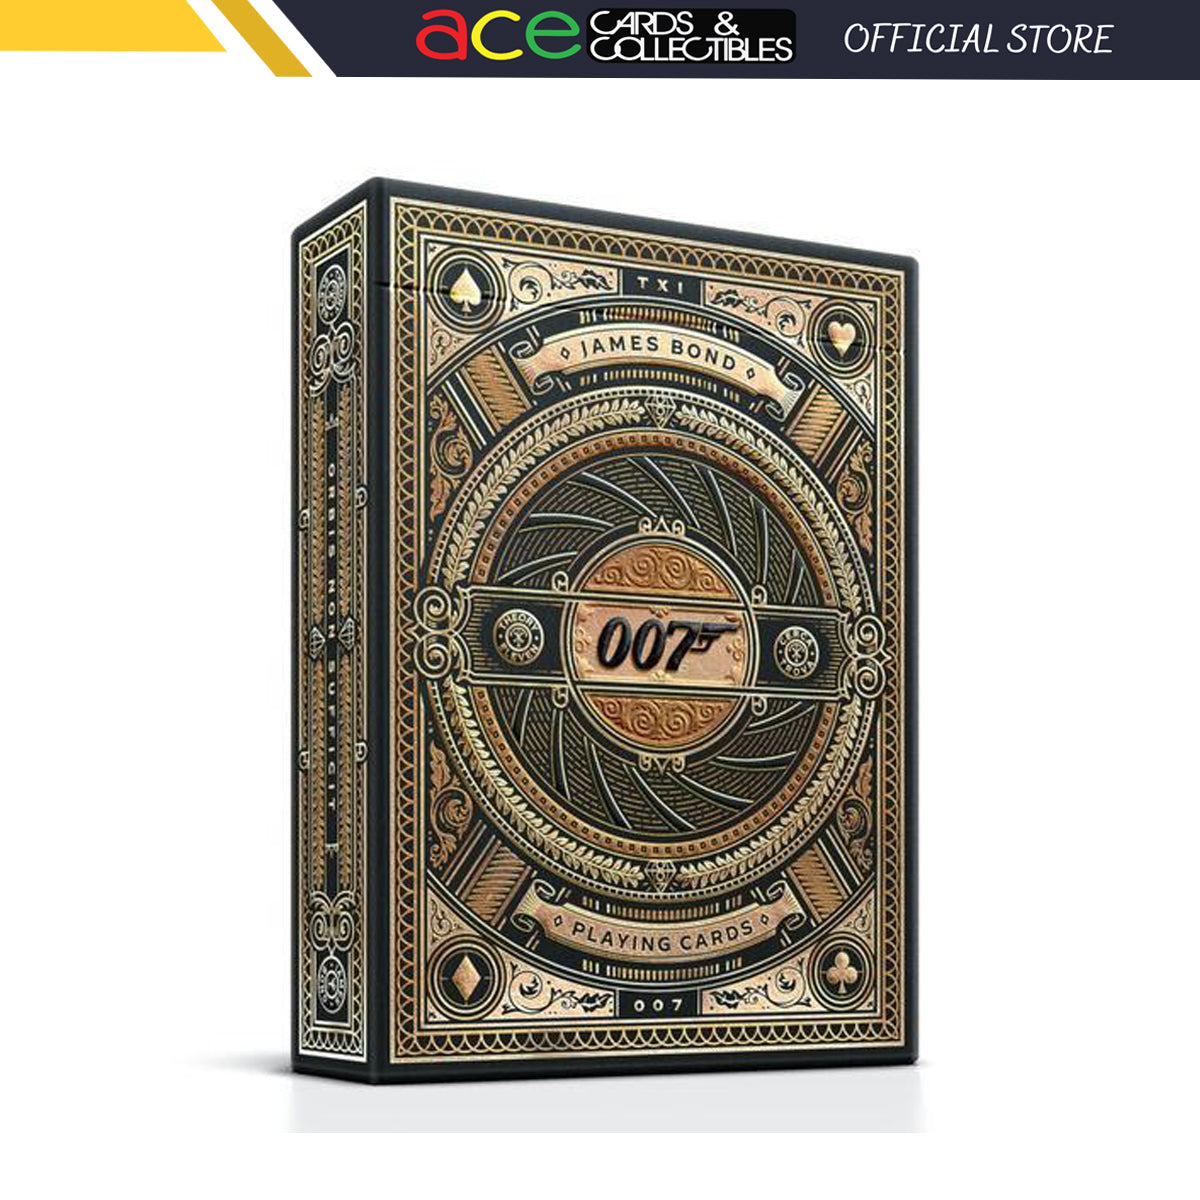 James Bond 007 Playing Cards-United States Playing Cards Company-Ace Cards & Collectibles